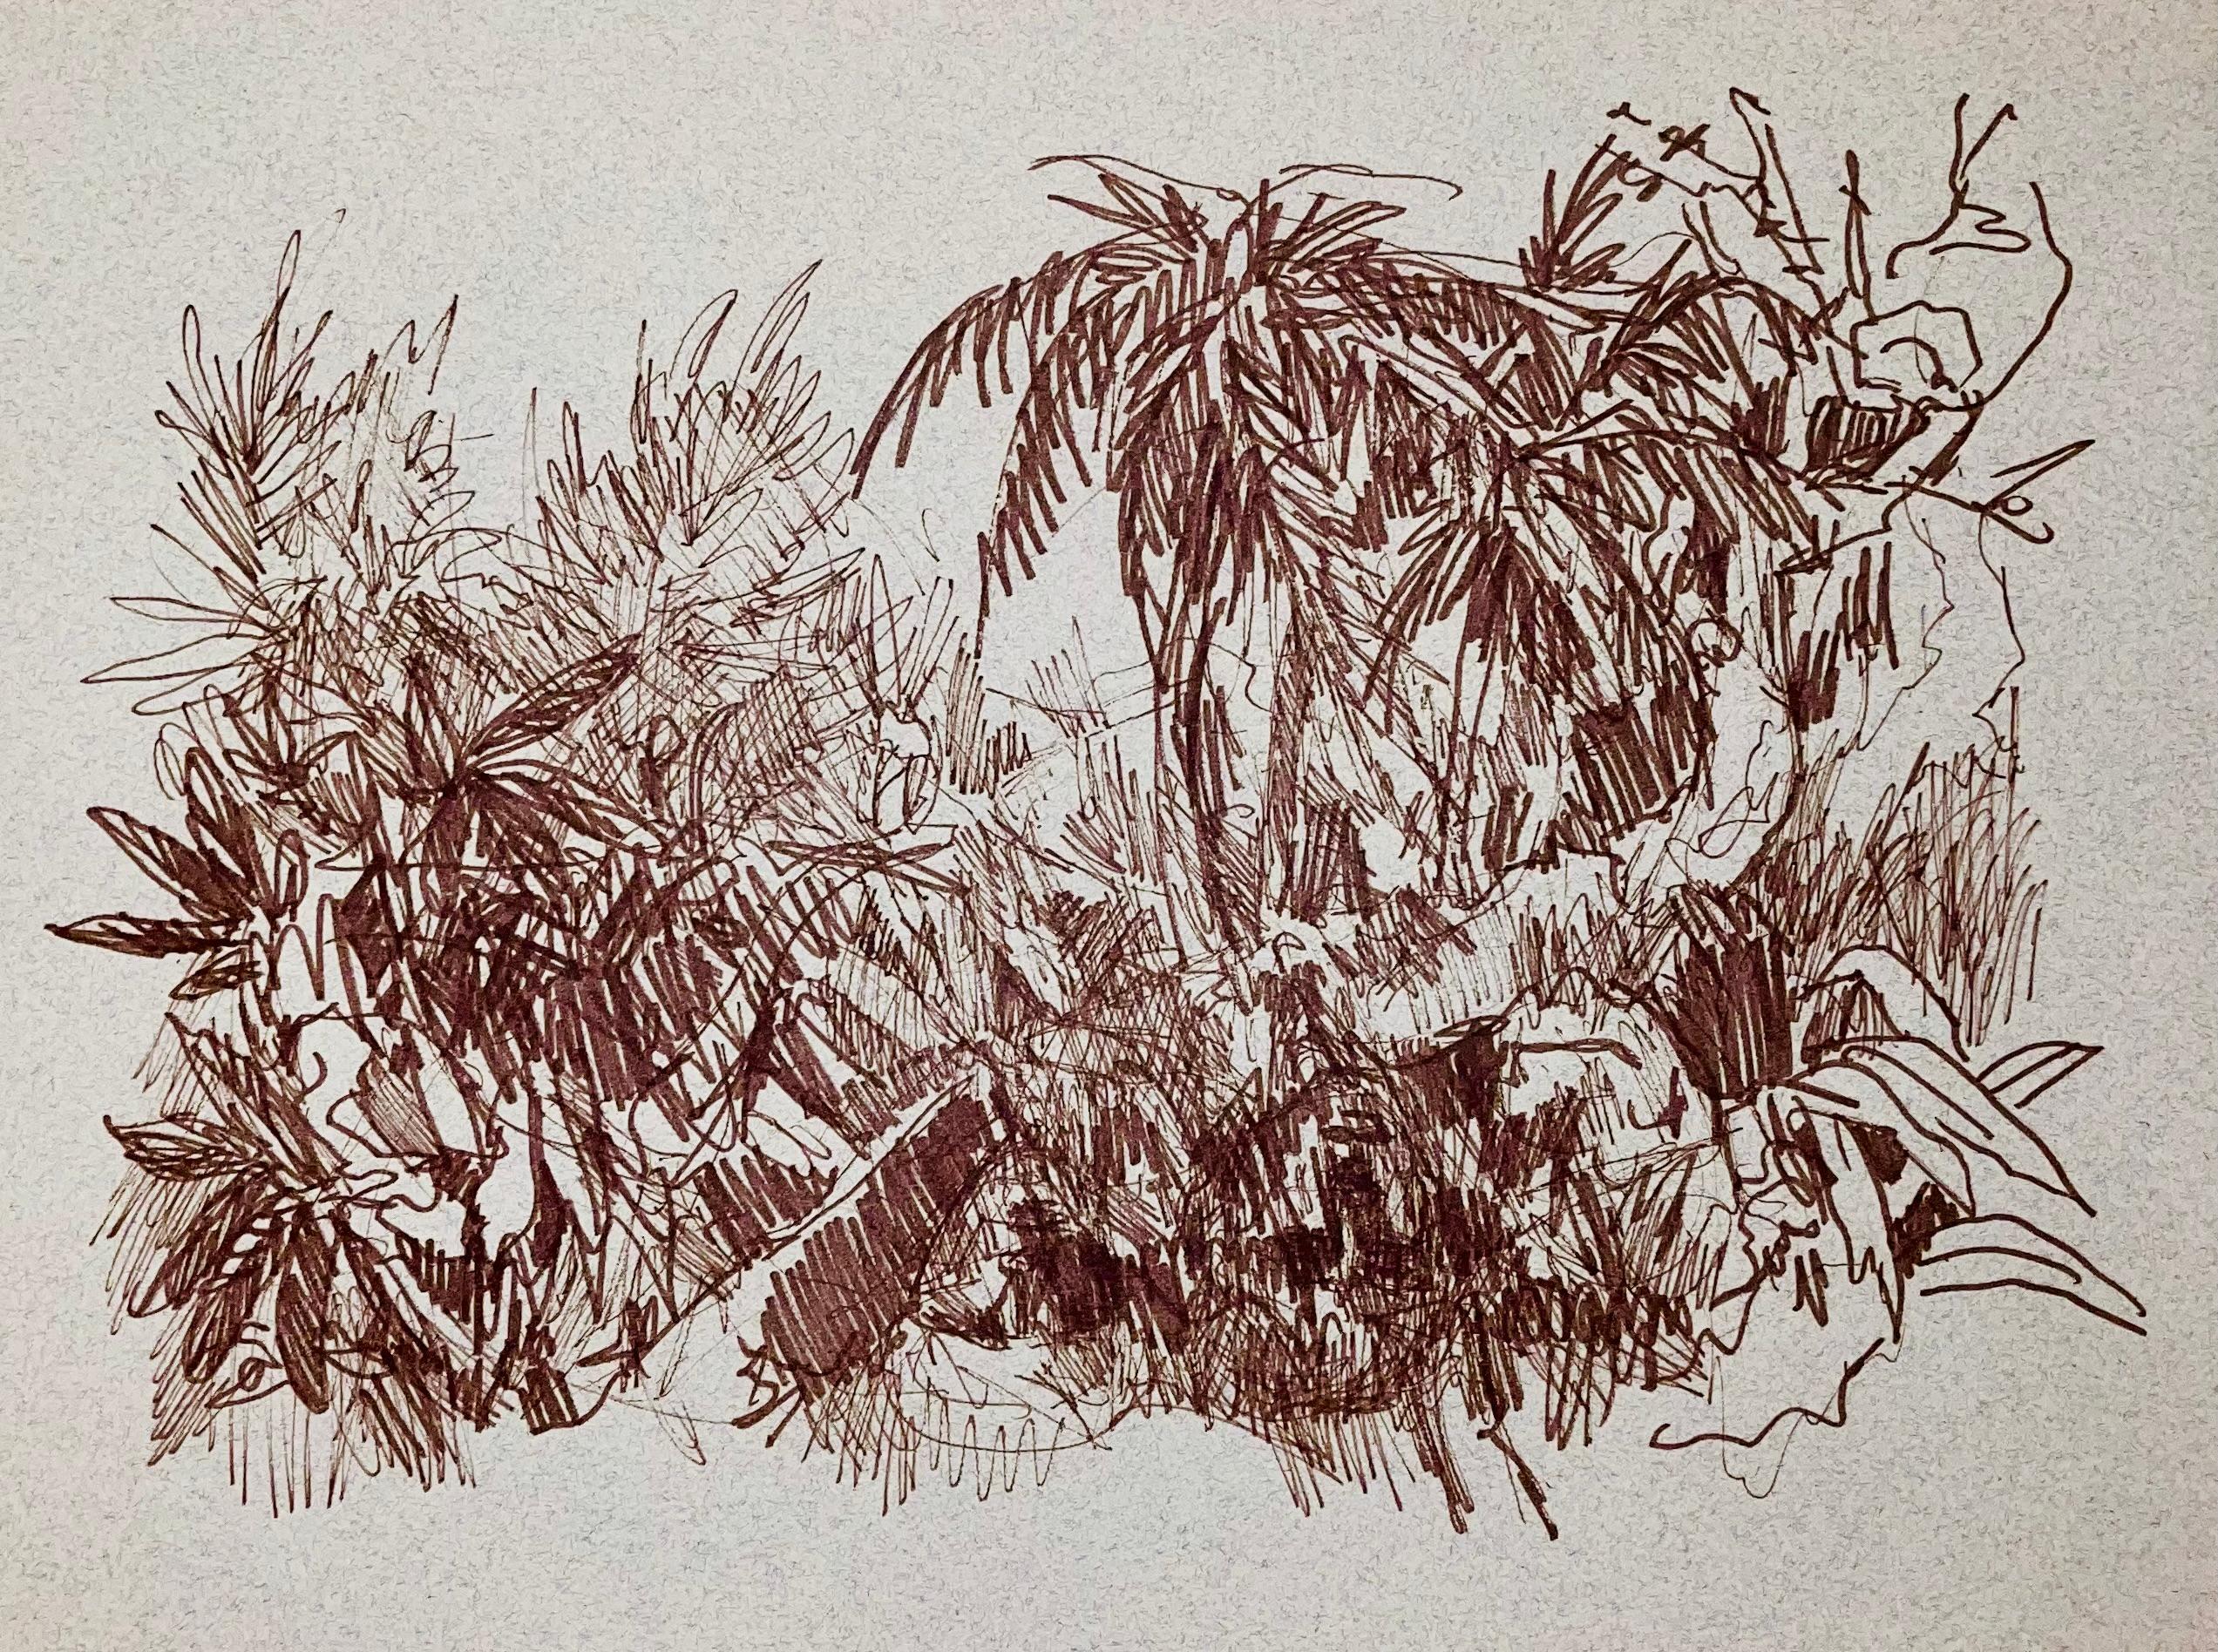 Original drawing on archival paper, circa 2001.  Paper Size: 9 x 12 inches. Provenance: Estate of Ian Hornak, East Hampton, New York.

IAN HORNAK (January 9, 1944 – December 9, 2002) was an American draughtsman, painter and printmaker. Described by